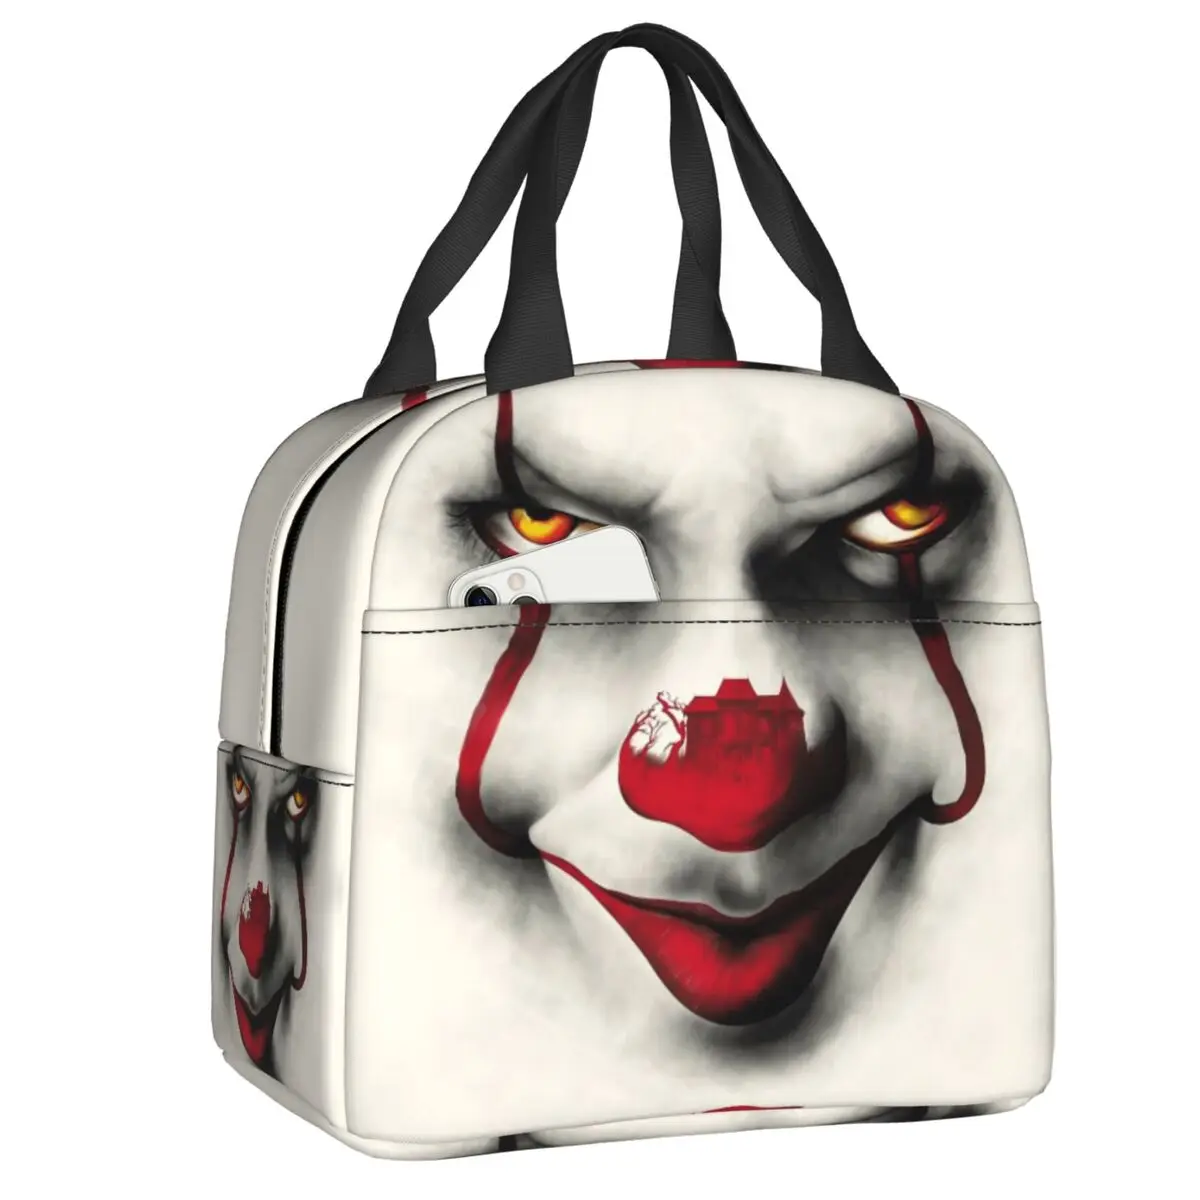 

Halloween Clown Portable Lunch Box for Women Thermal Cooler Food Insulated Horror Movie Character Lunch Bag Portable Picnic Tote